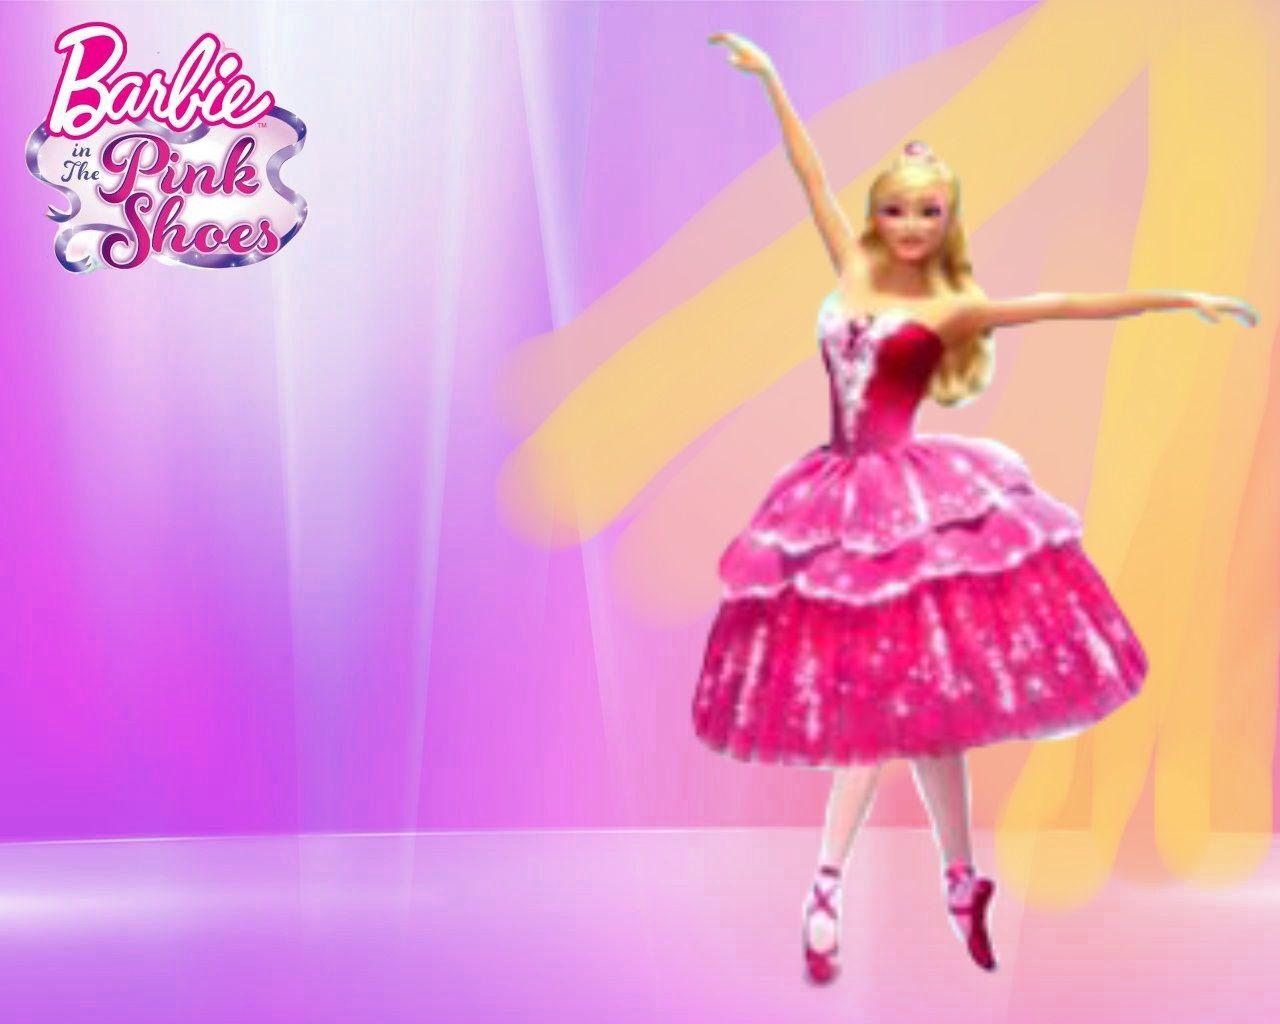 Newly Released Barbie Movies image Barbie In The Pink Shoes HD